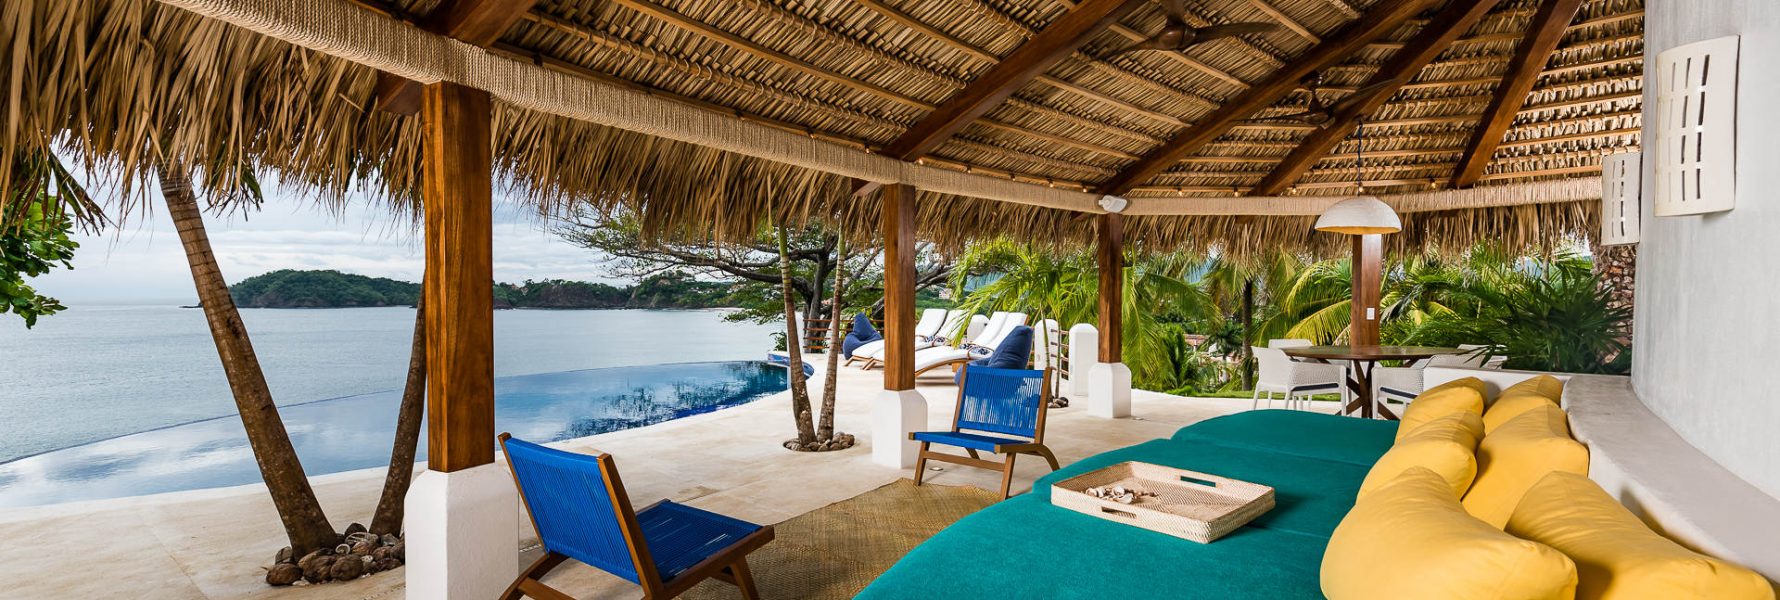 Sit back and relax with this amazing sitting area overlooking the pool and ocean.